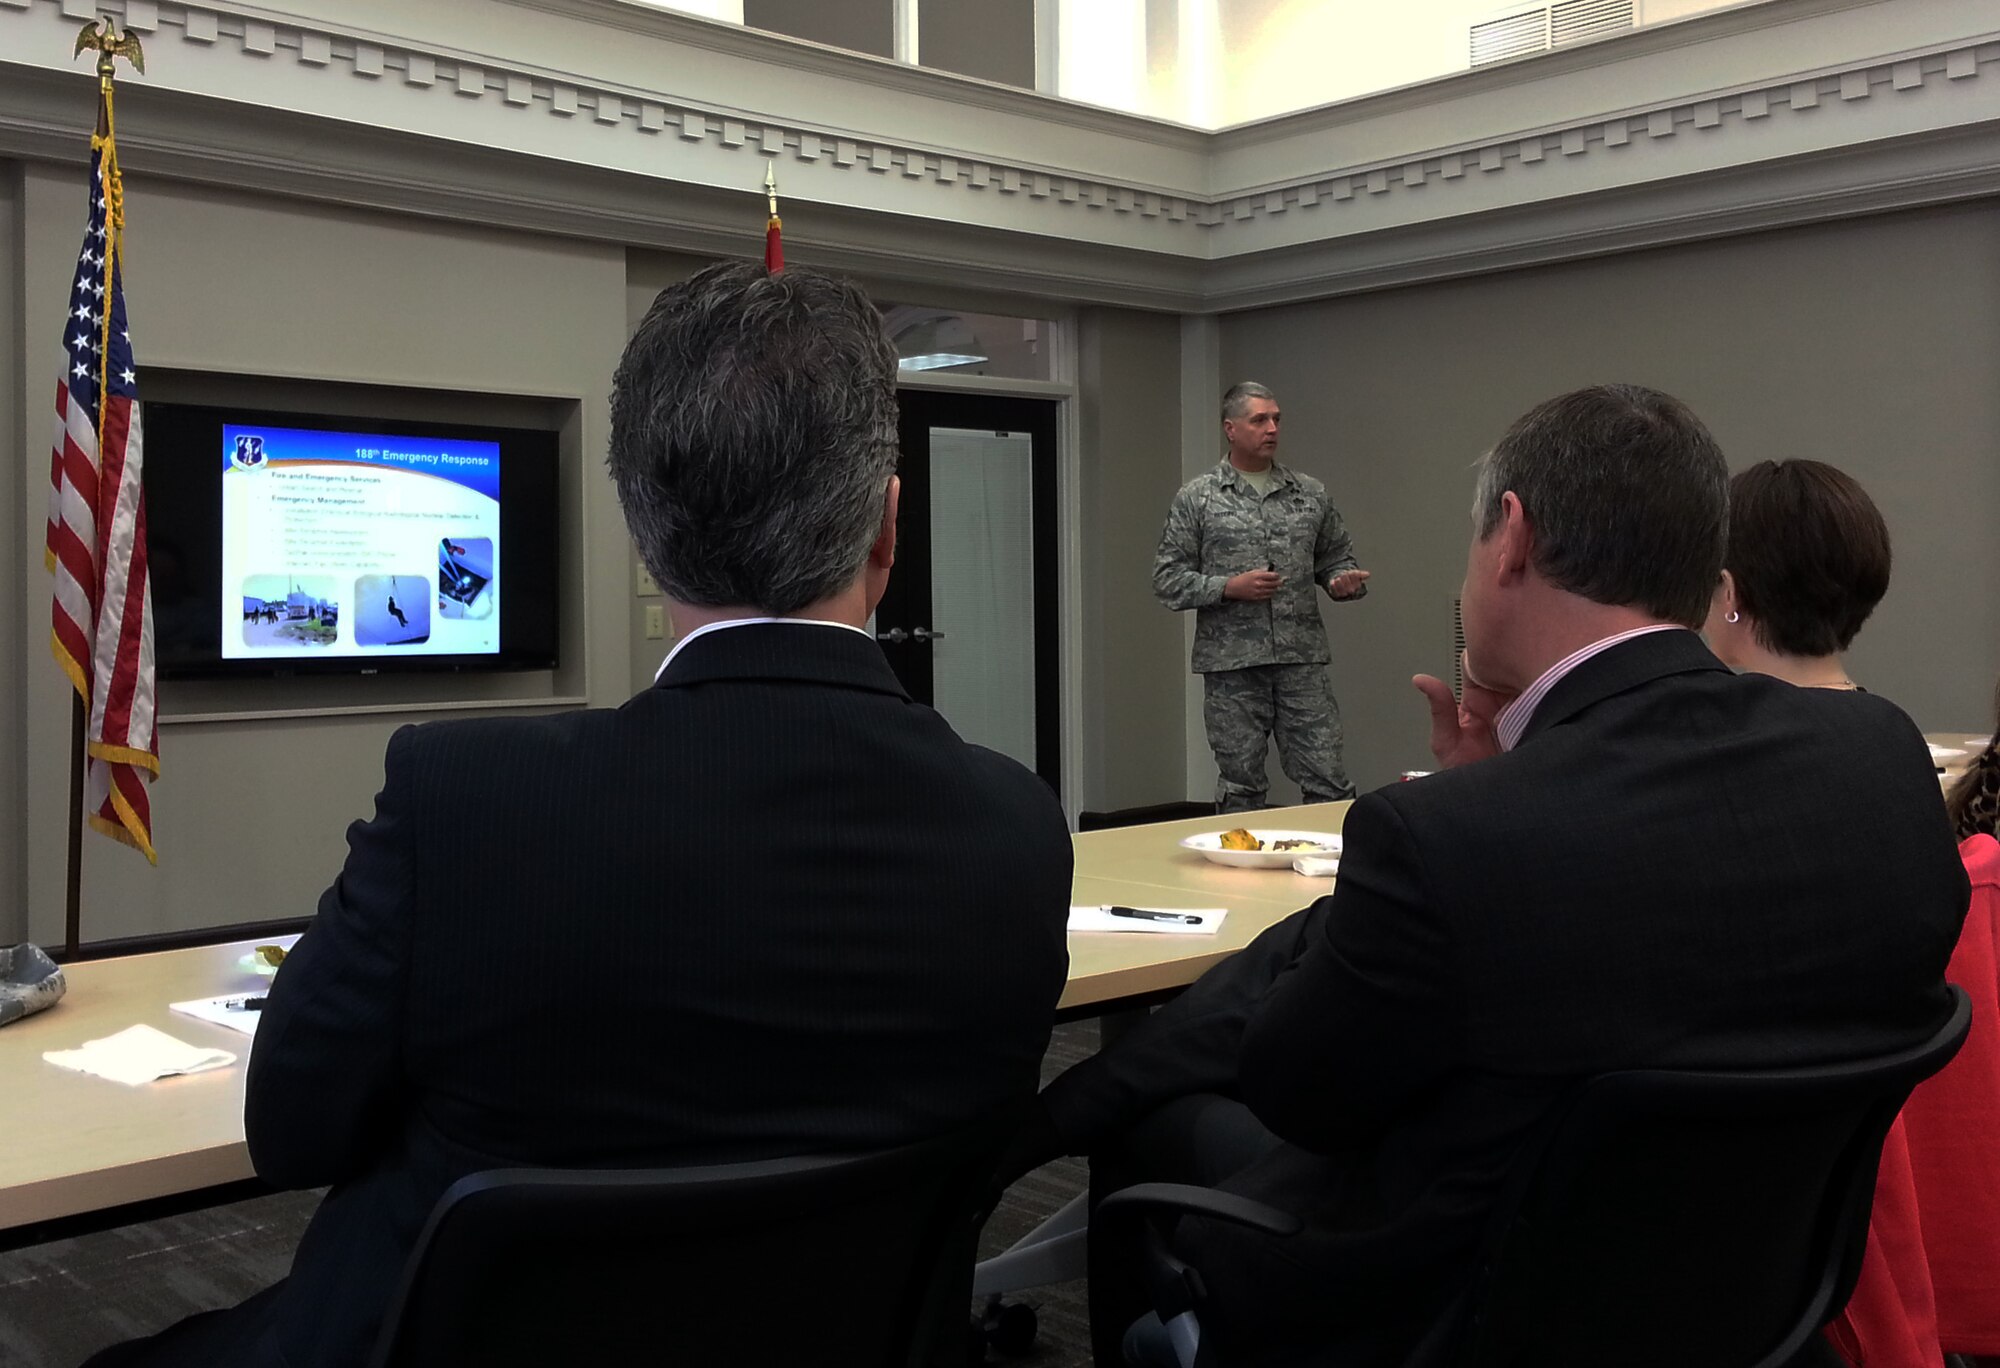 Chief Master Sgt. Ron Redding, 188th Civil Engineer Squadron, speaks to area company human resource professionals at the Fort Smith Regional Chamber of Commerce March 10. The objective of the meeting was to educate local companies on a partnership initiative between the 188th and the Chamber of Commerce. The strategy focuses on linking drill-status Guardsmen with full-time employment opportunities in the River Valley. The meeting educated local employers on specific training and education 188th members receive and how those specialties can benefit the local civilian workforce. (U.S. Air National Guard photo by Maj. Heath Allen/Released)